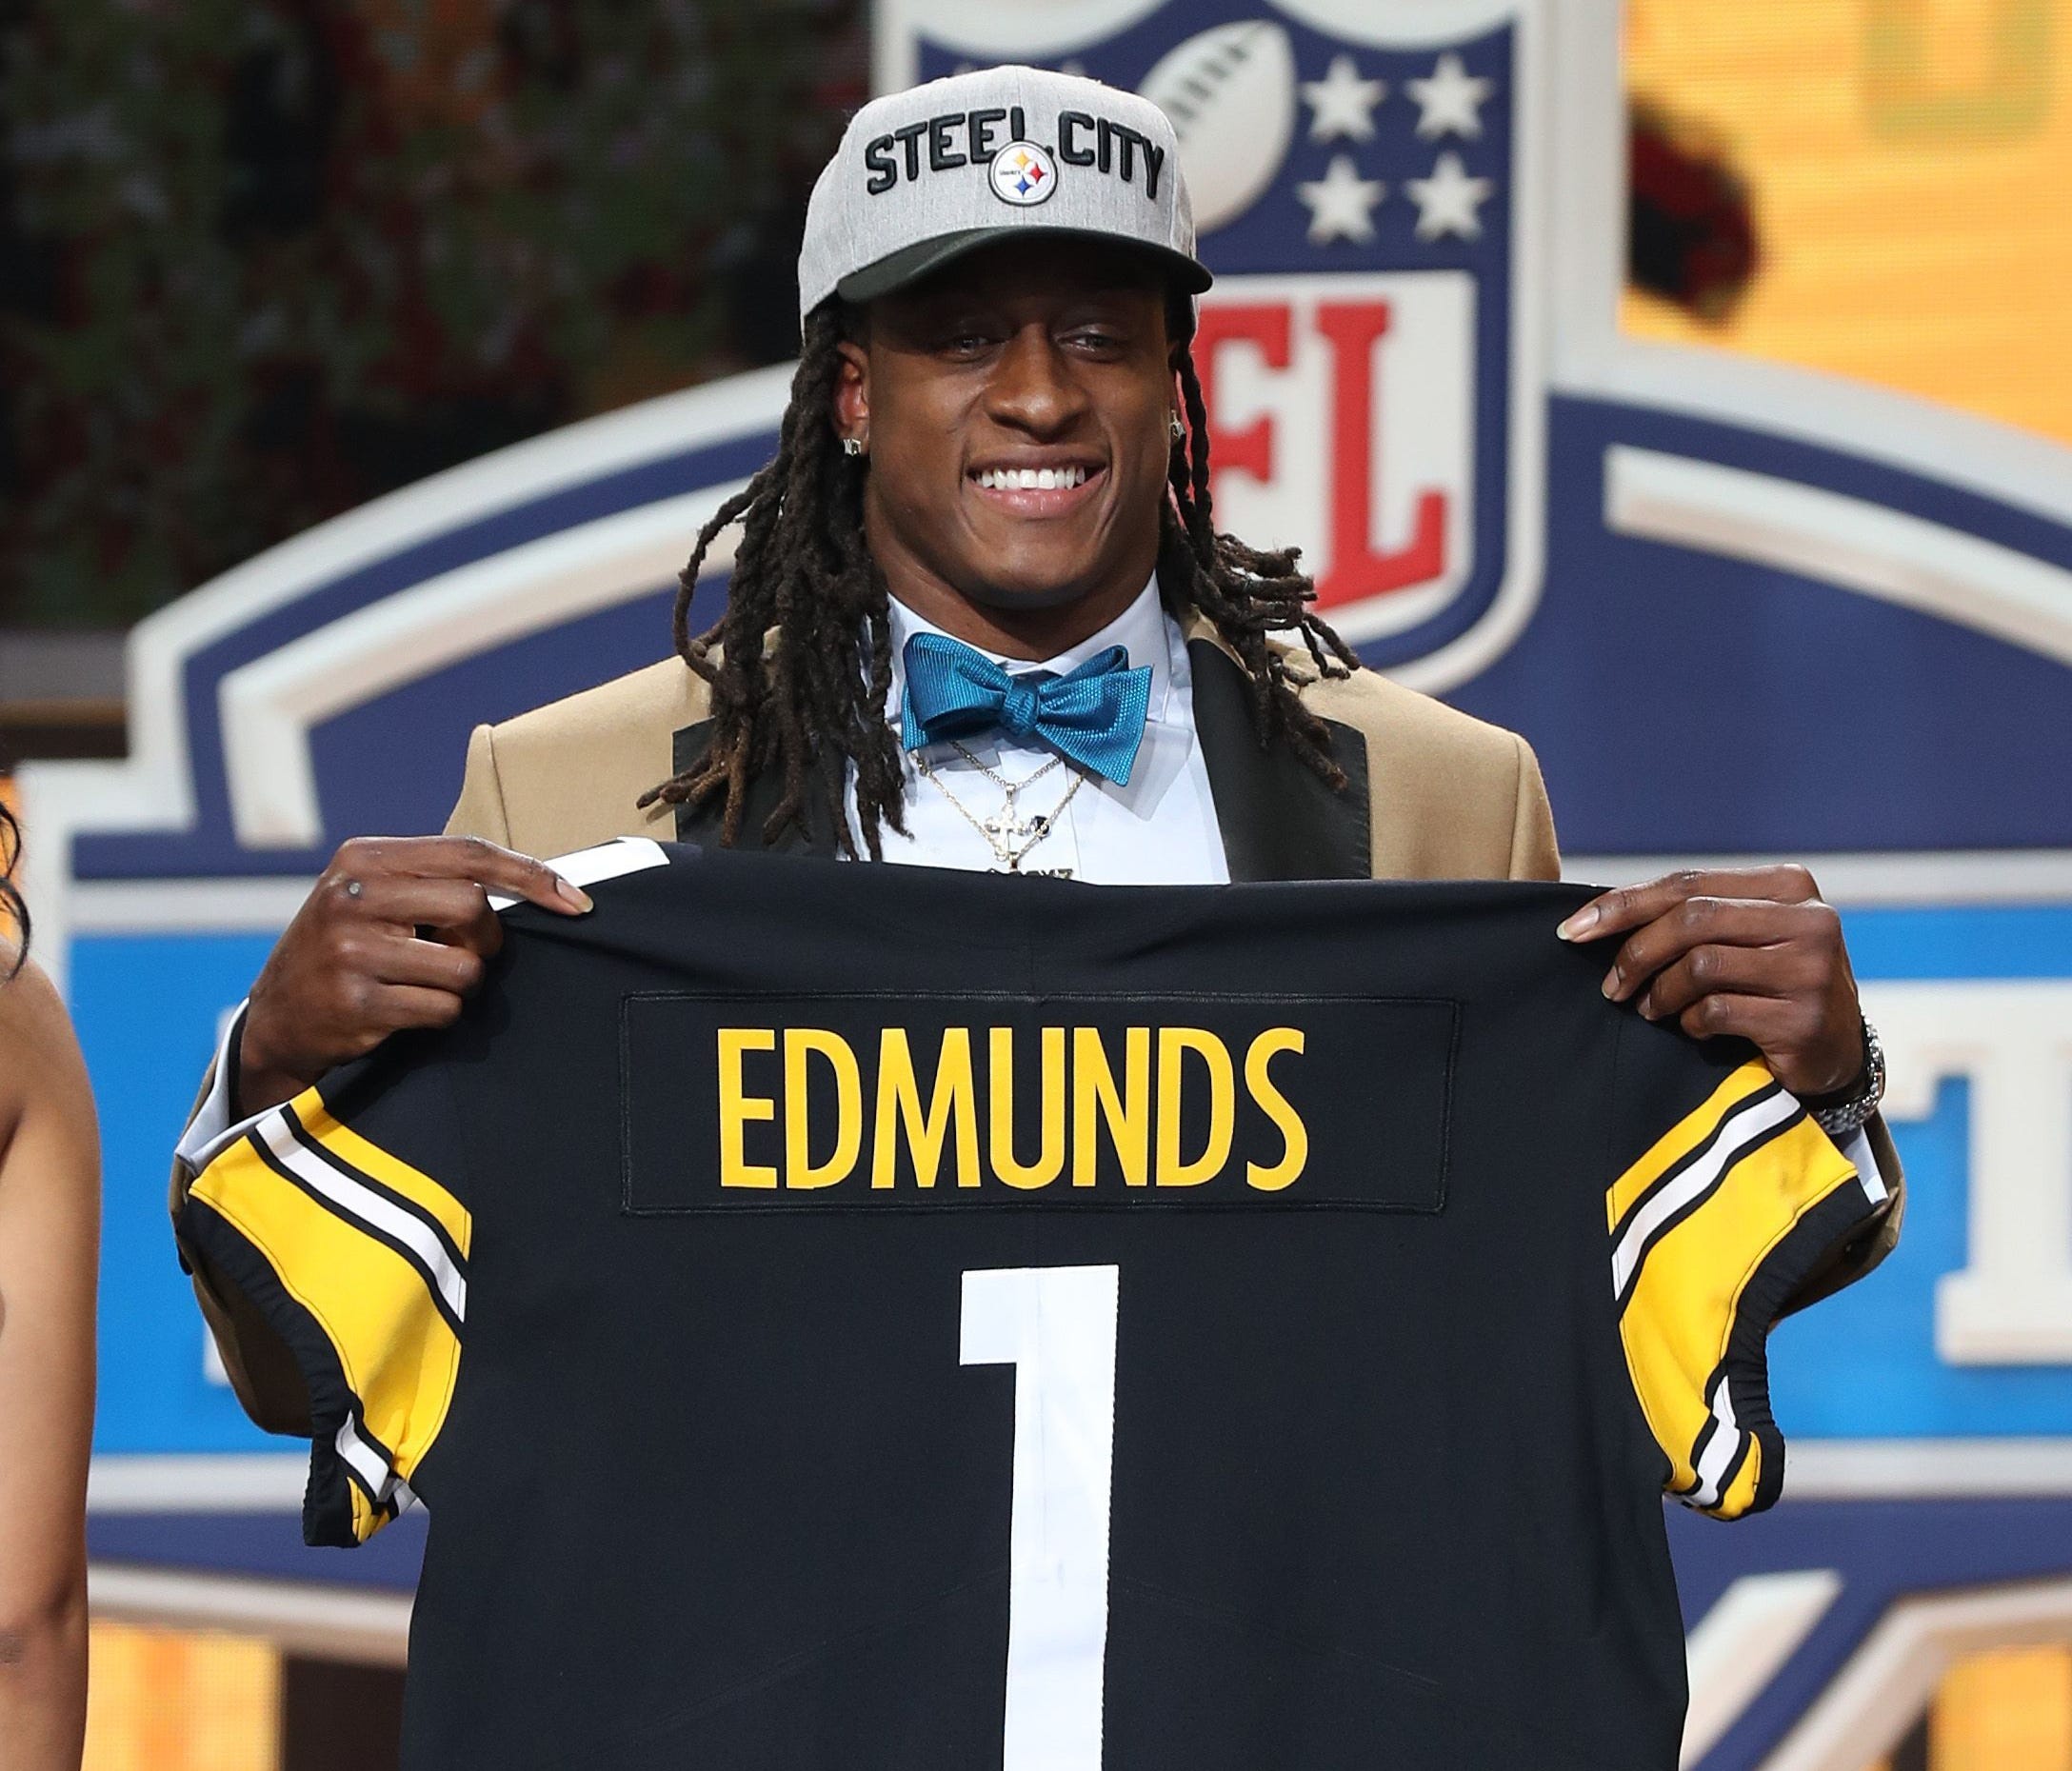 Terrell Edmunds is the No. 28 pick for the Pittsburgh Steelers in the first round of the 2018 NFL draft at AT&T Stadium.